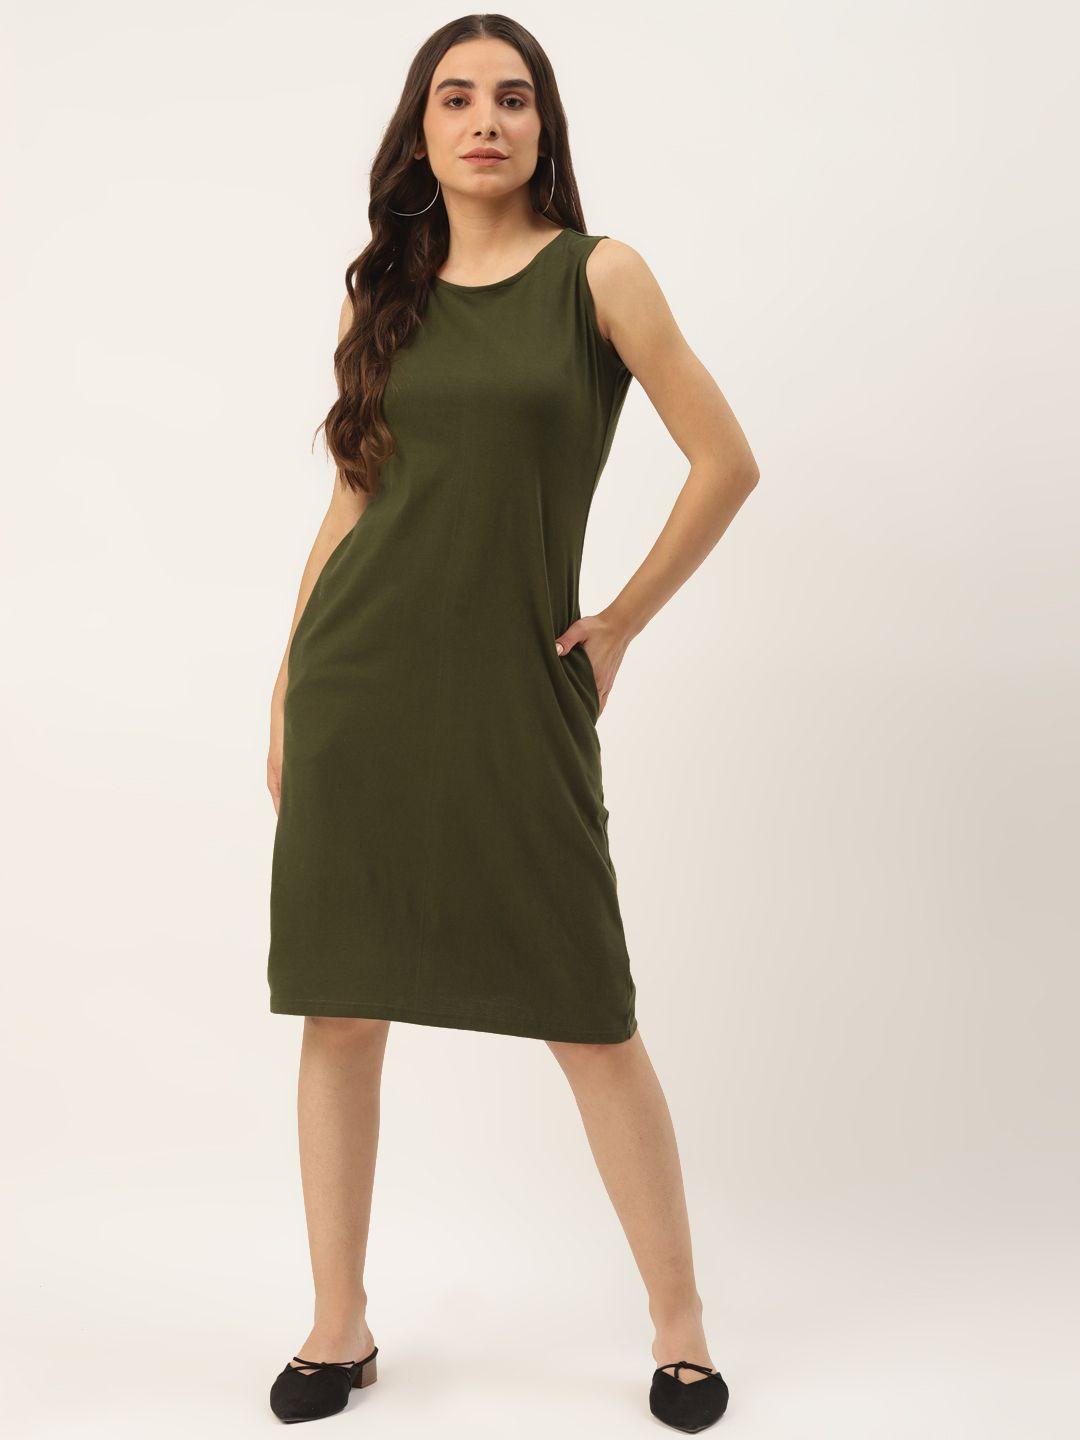 brinns olive green pure cotton solid  a-line dress